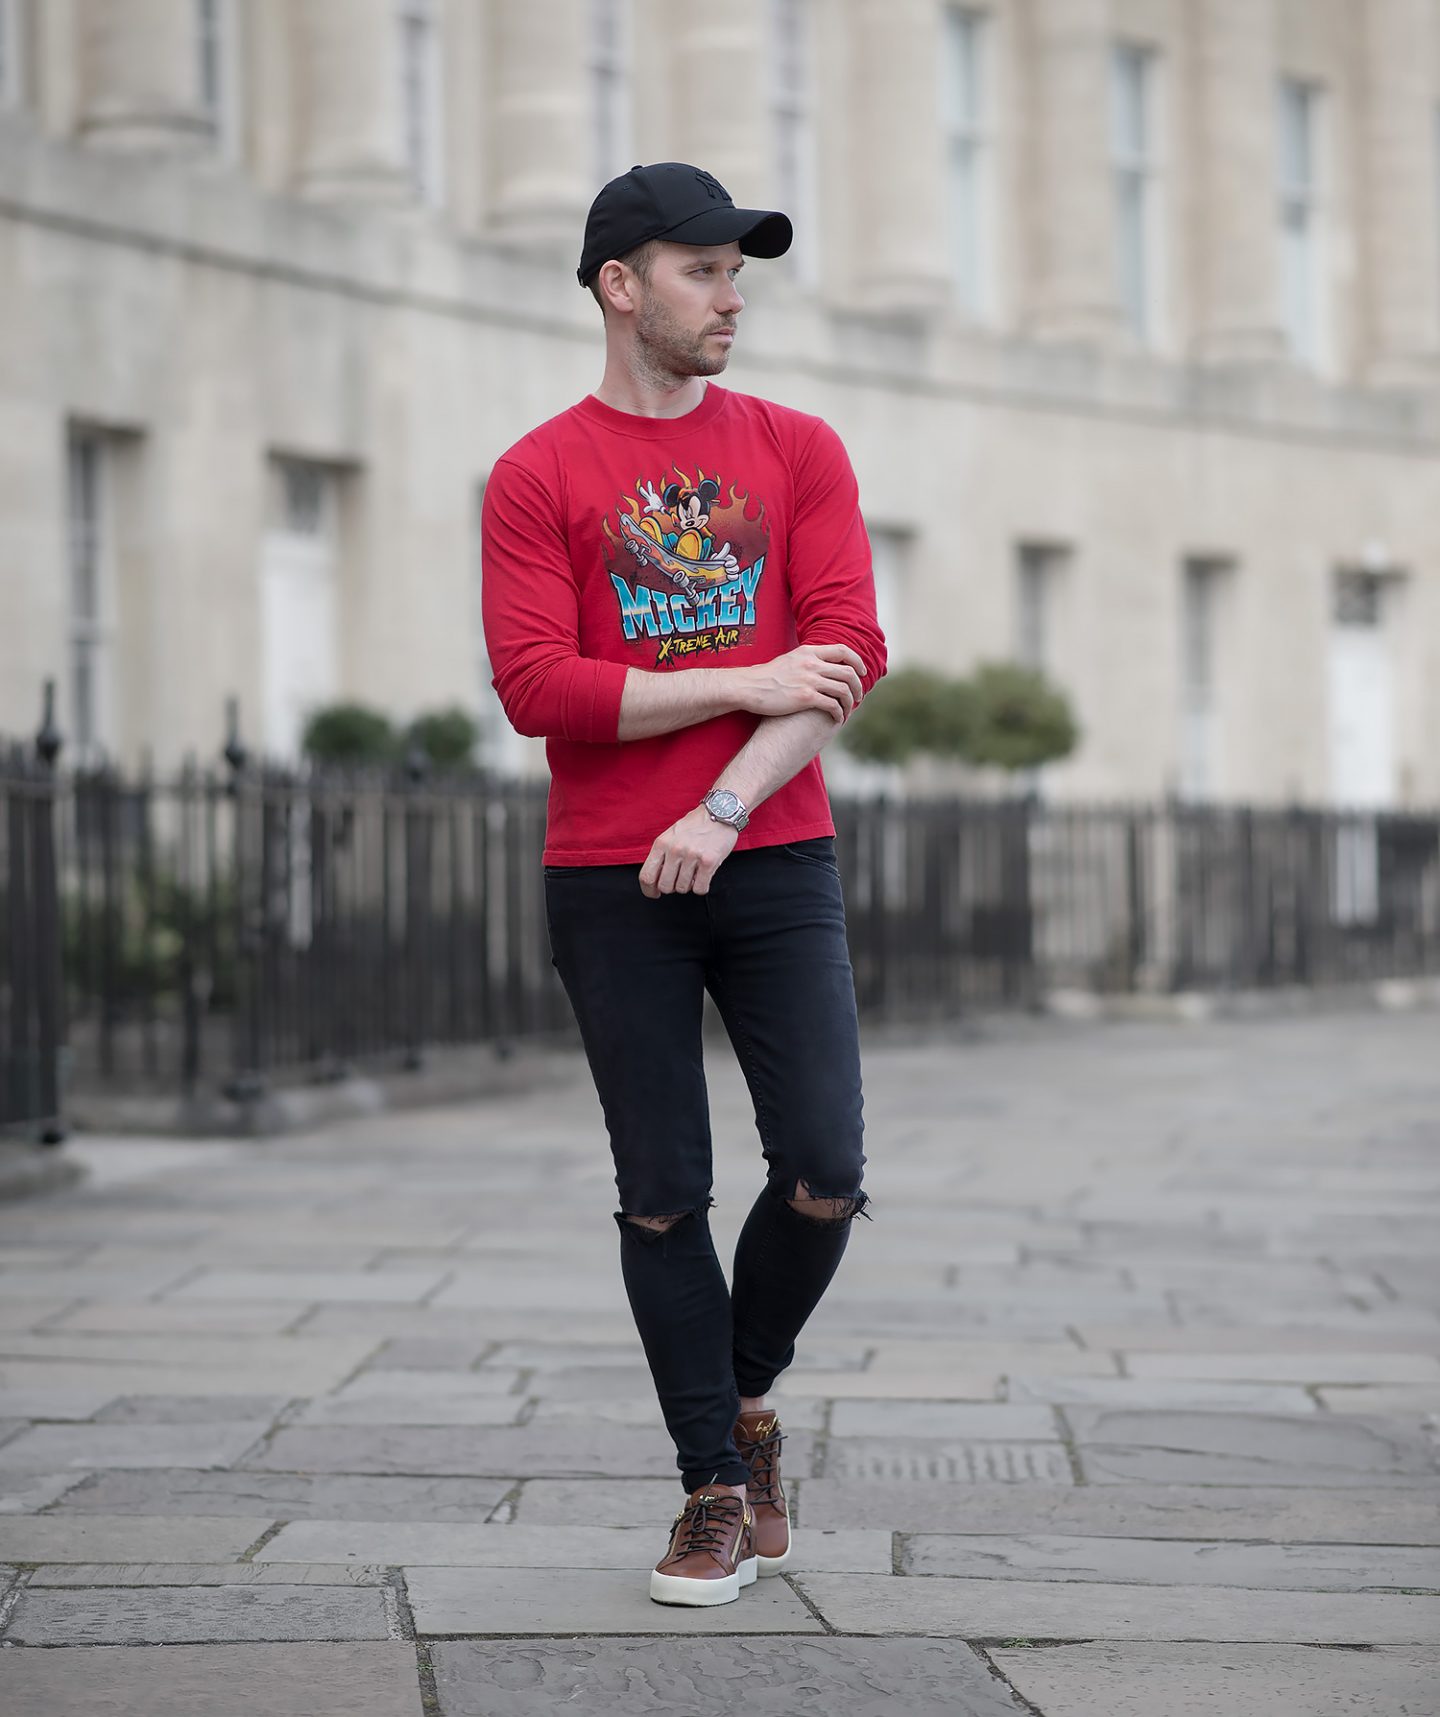 Mickey Mouse Retro Outfit Style - Your Average Guy